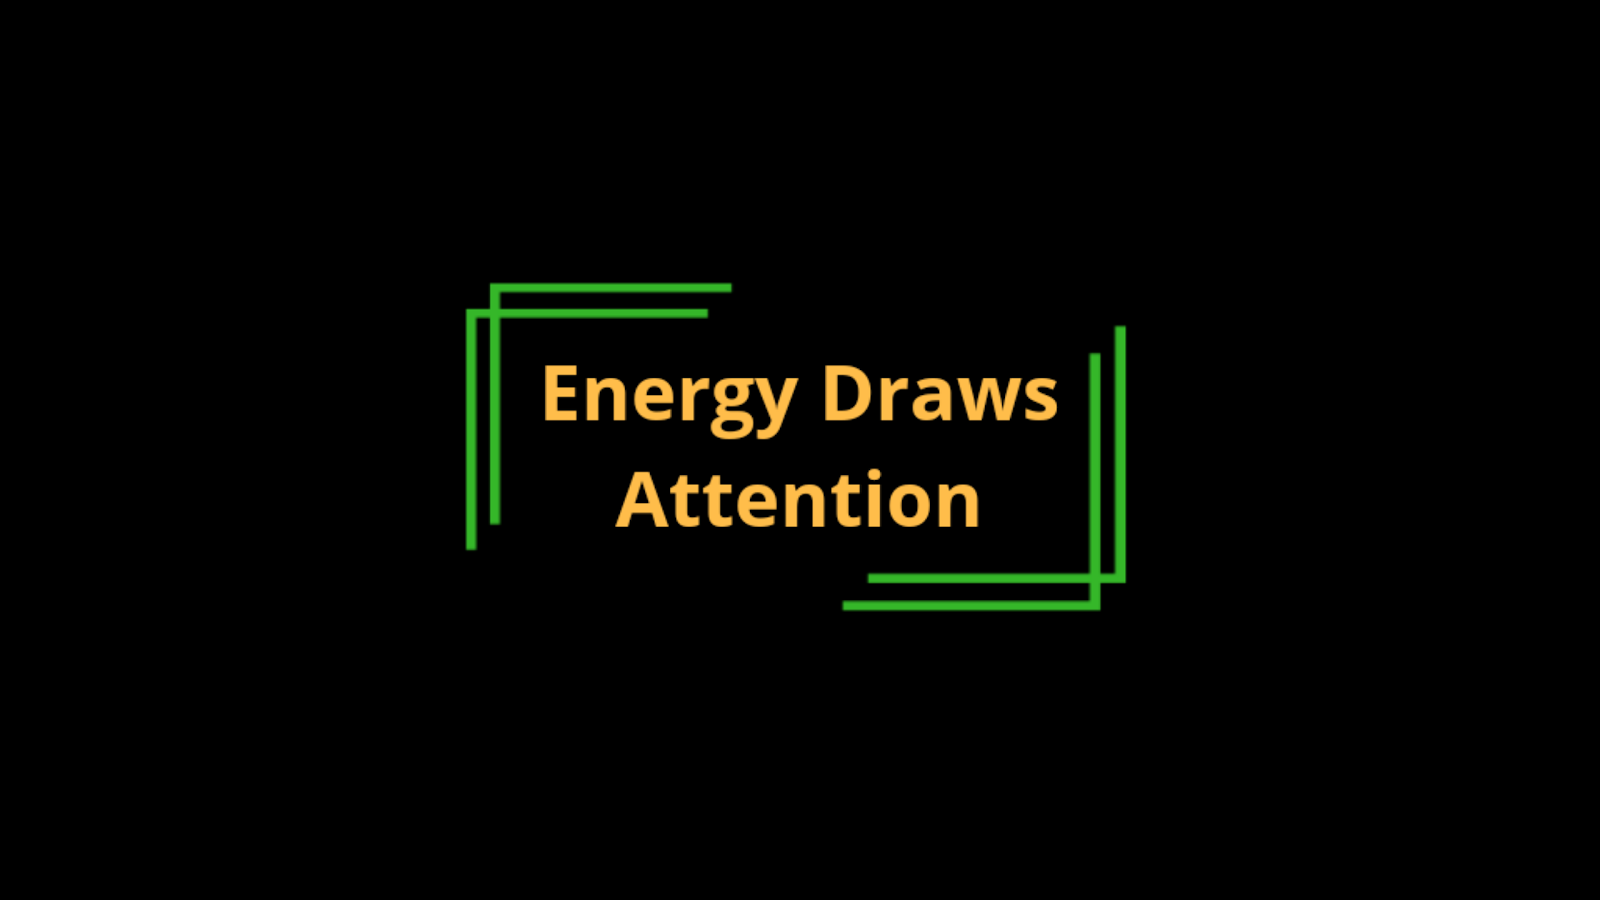 Energy Draws Attention